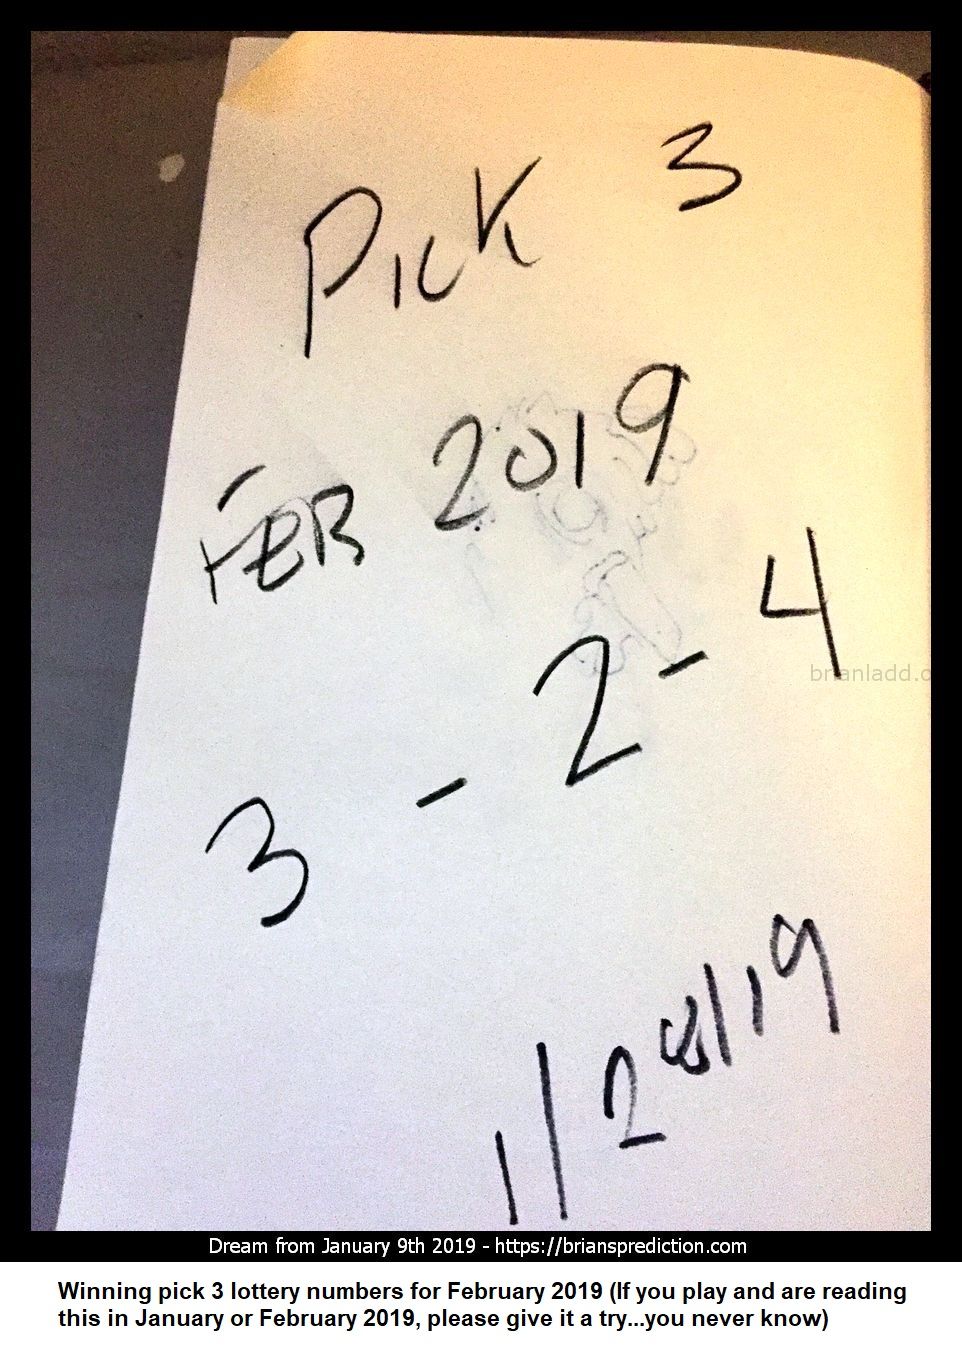 11632 28 January 2019 3 - Winning Pick 3 Lottery Numbers For February 2019 (If You Play And Are Reading This In January ...
Winning Pick 3 Lottery Numbers For February 2019 (If You Play And Are Reading This In January Or February 2019, Please Give It A Try  You Never Know)  Dream Number 11632 28 January 2019 3 Psychic Prediction
